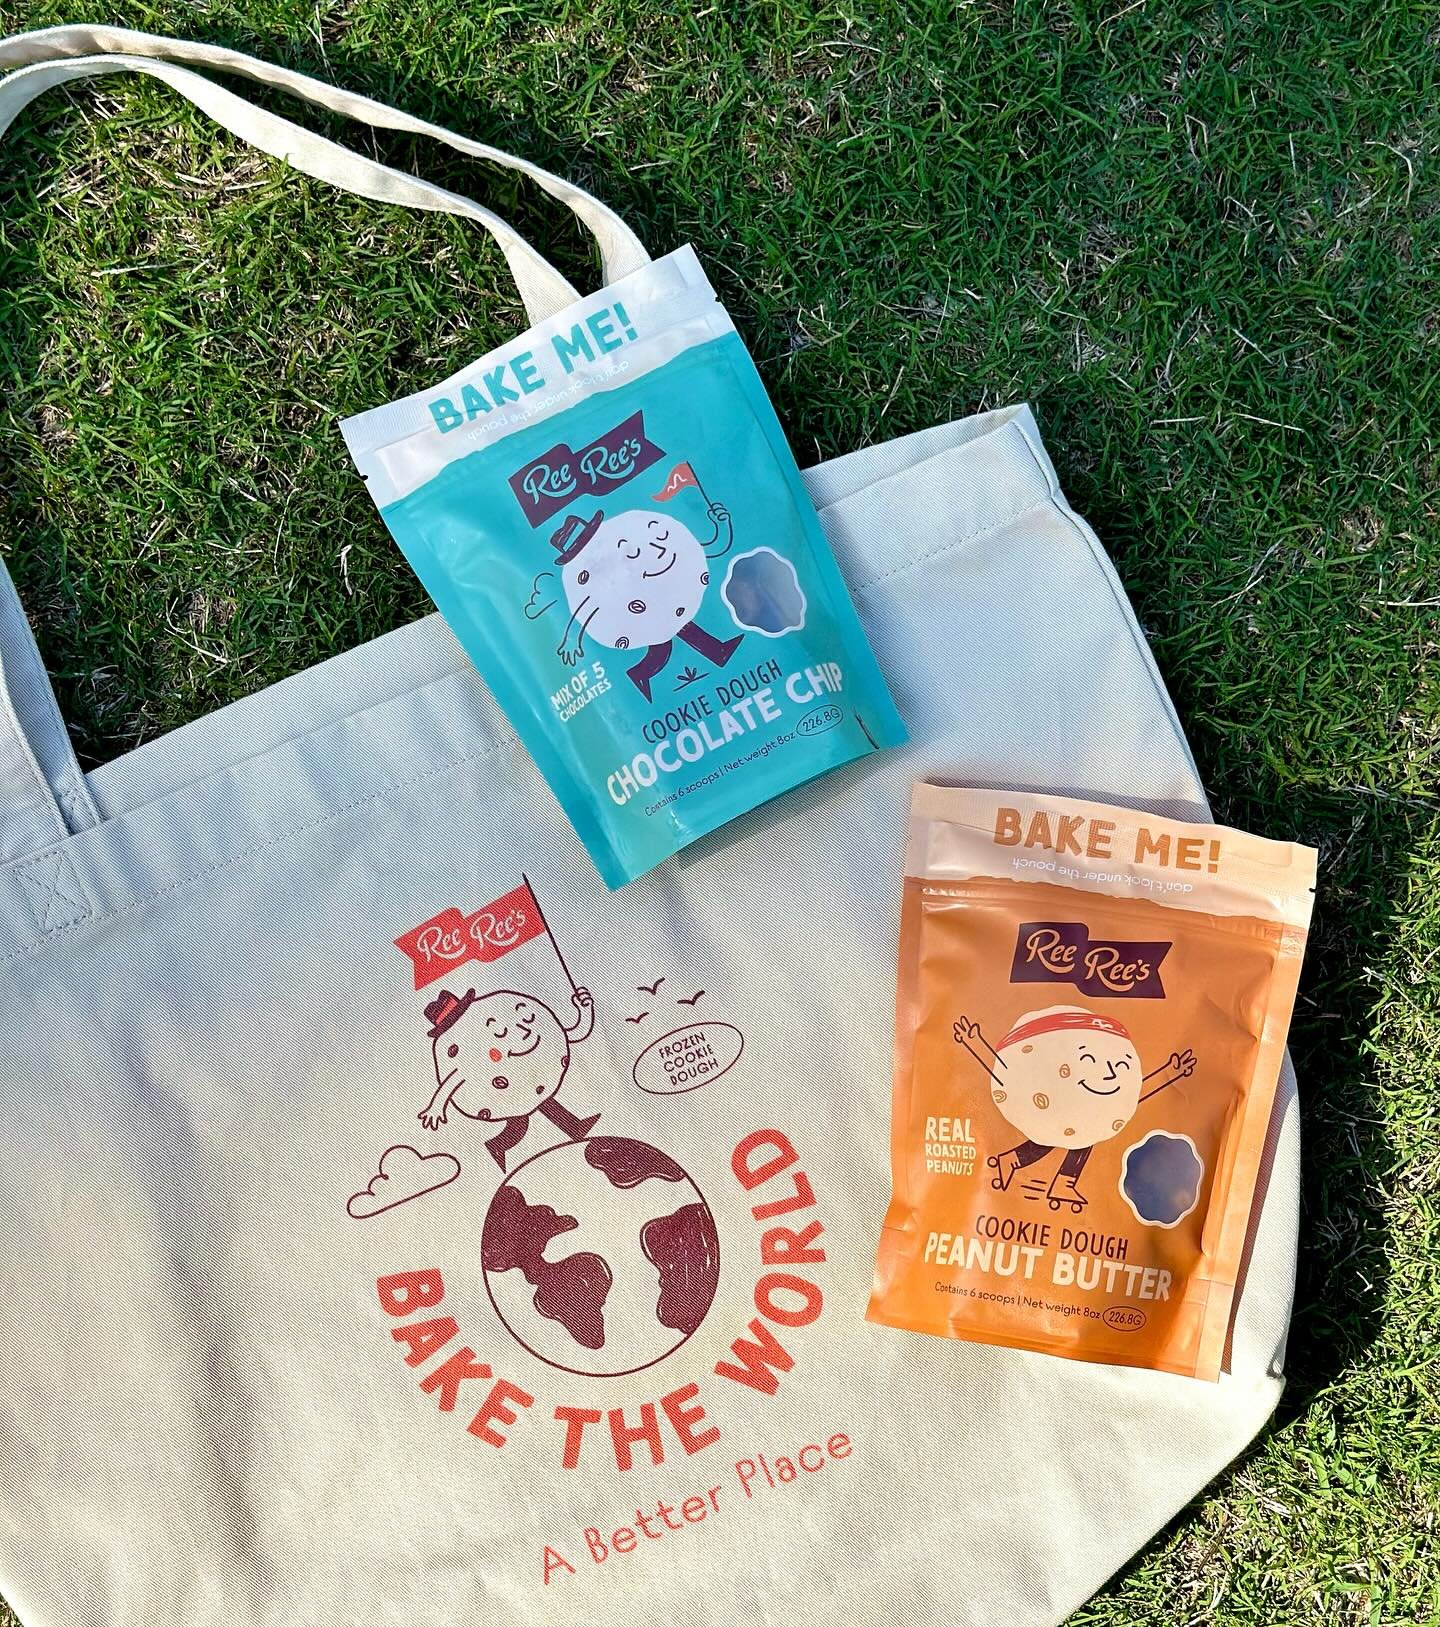 🌎 EARTH DAY GIVEAWAY 🌏

Celebrate Earth Day with us! We&rsquo;re giving away a FREE reusable tote bag + cookie dough! Let&rsquo;s make eco-conscious choices sweeter than ever this year! 

How to ENTER:
✔️FOLLOW US: @reereesdough
✔️LIKE &amp; SAVE t